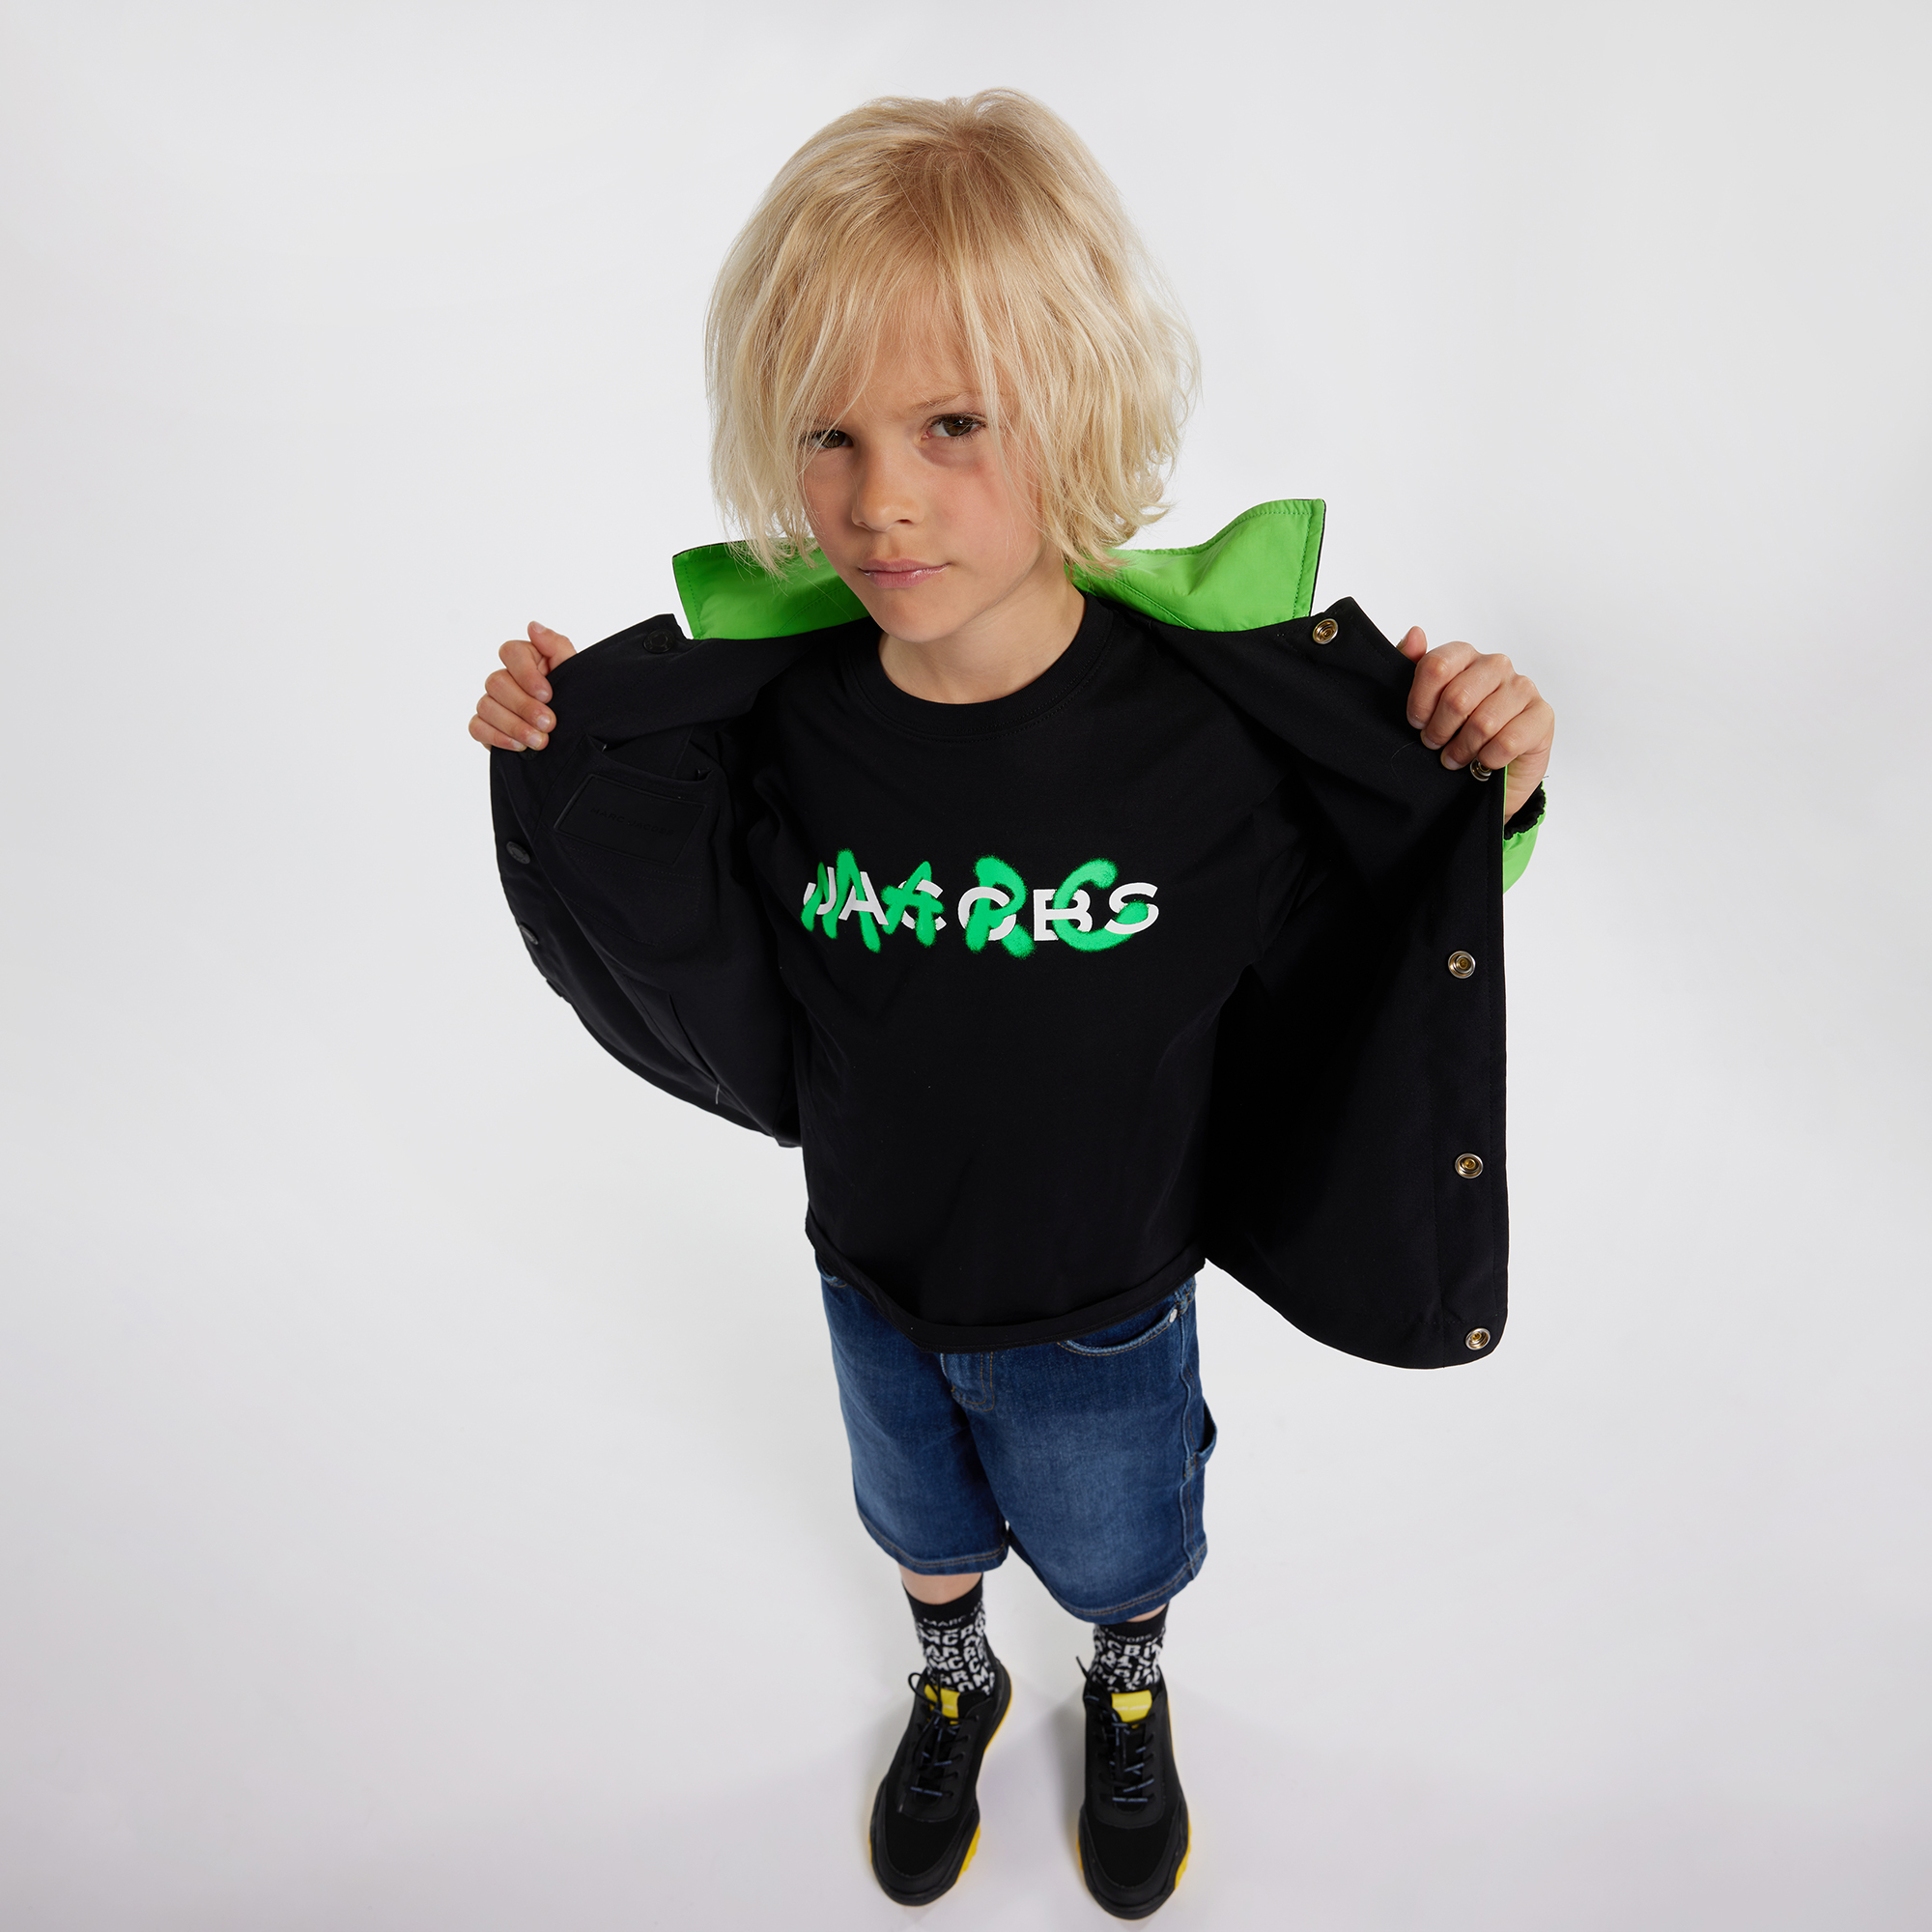 Reversible fabric jacket MARC JACOBS for BOY